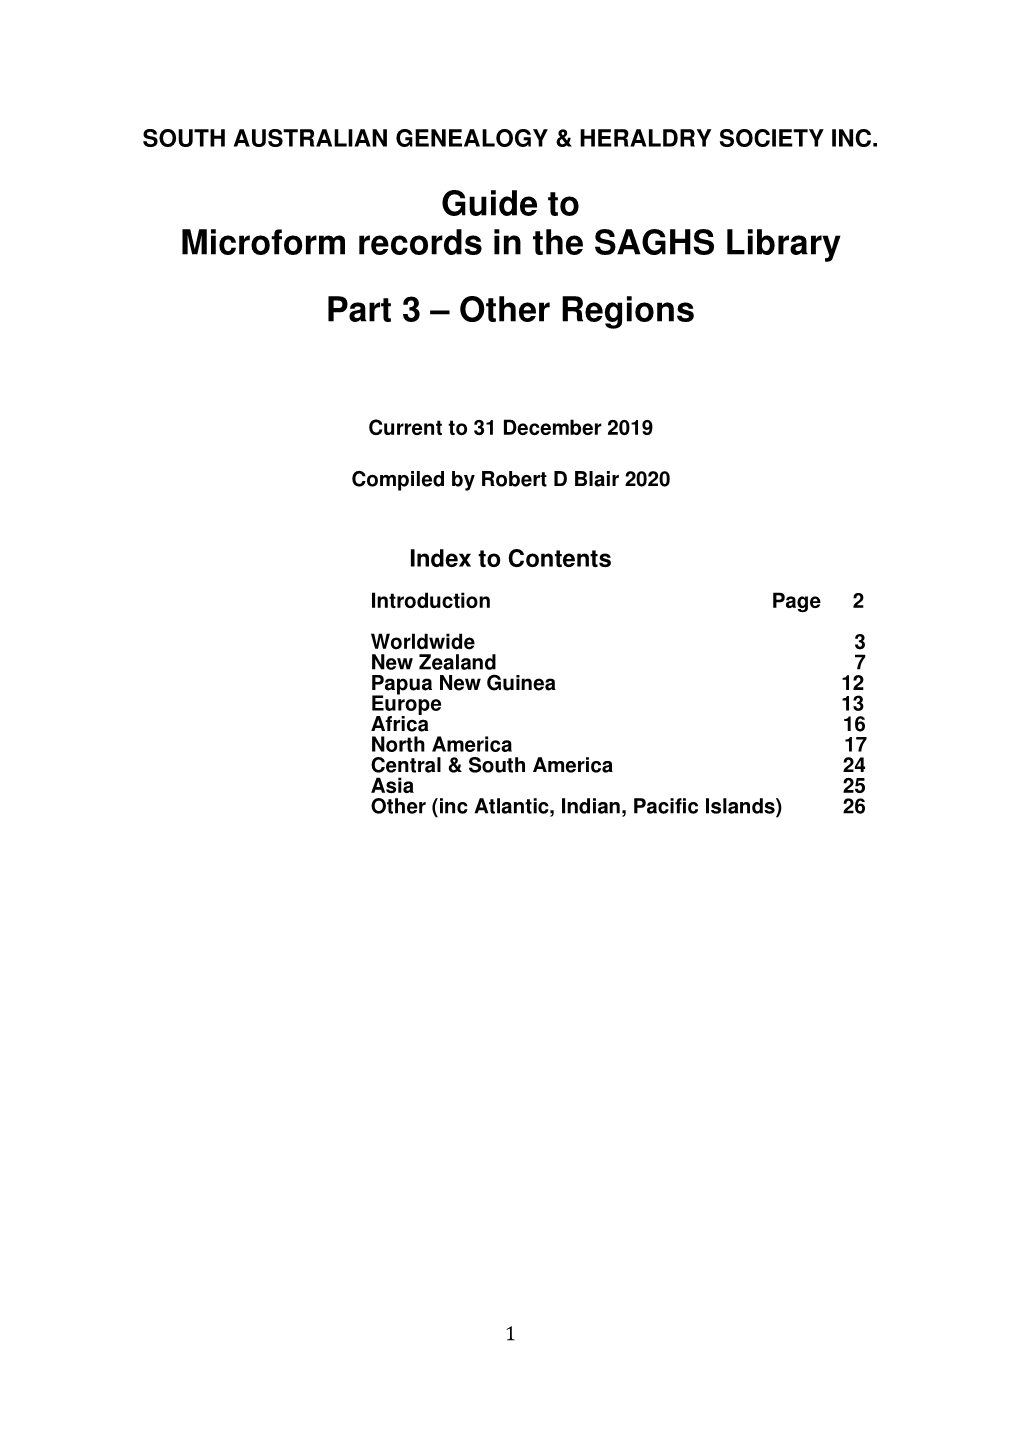 Guide to Microform Records in the SAGHS Library Part 3 – Other